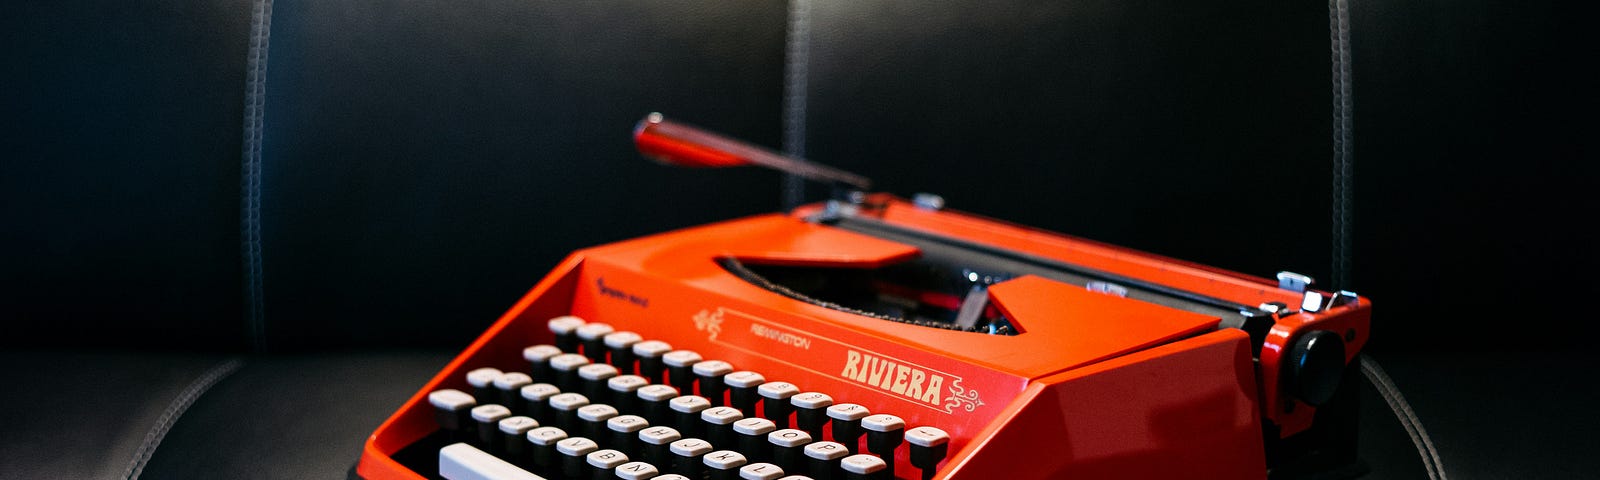 A bright red typewriter sits on a black couch